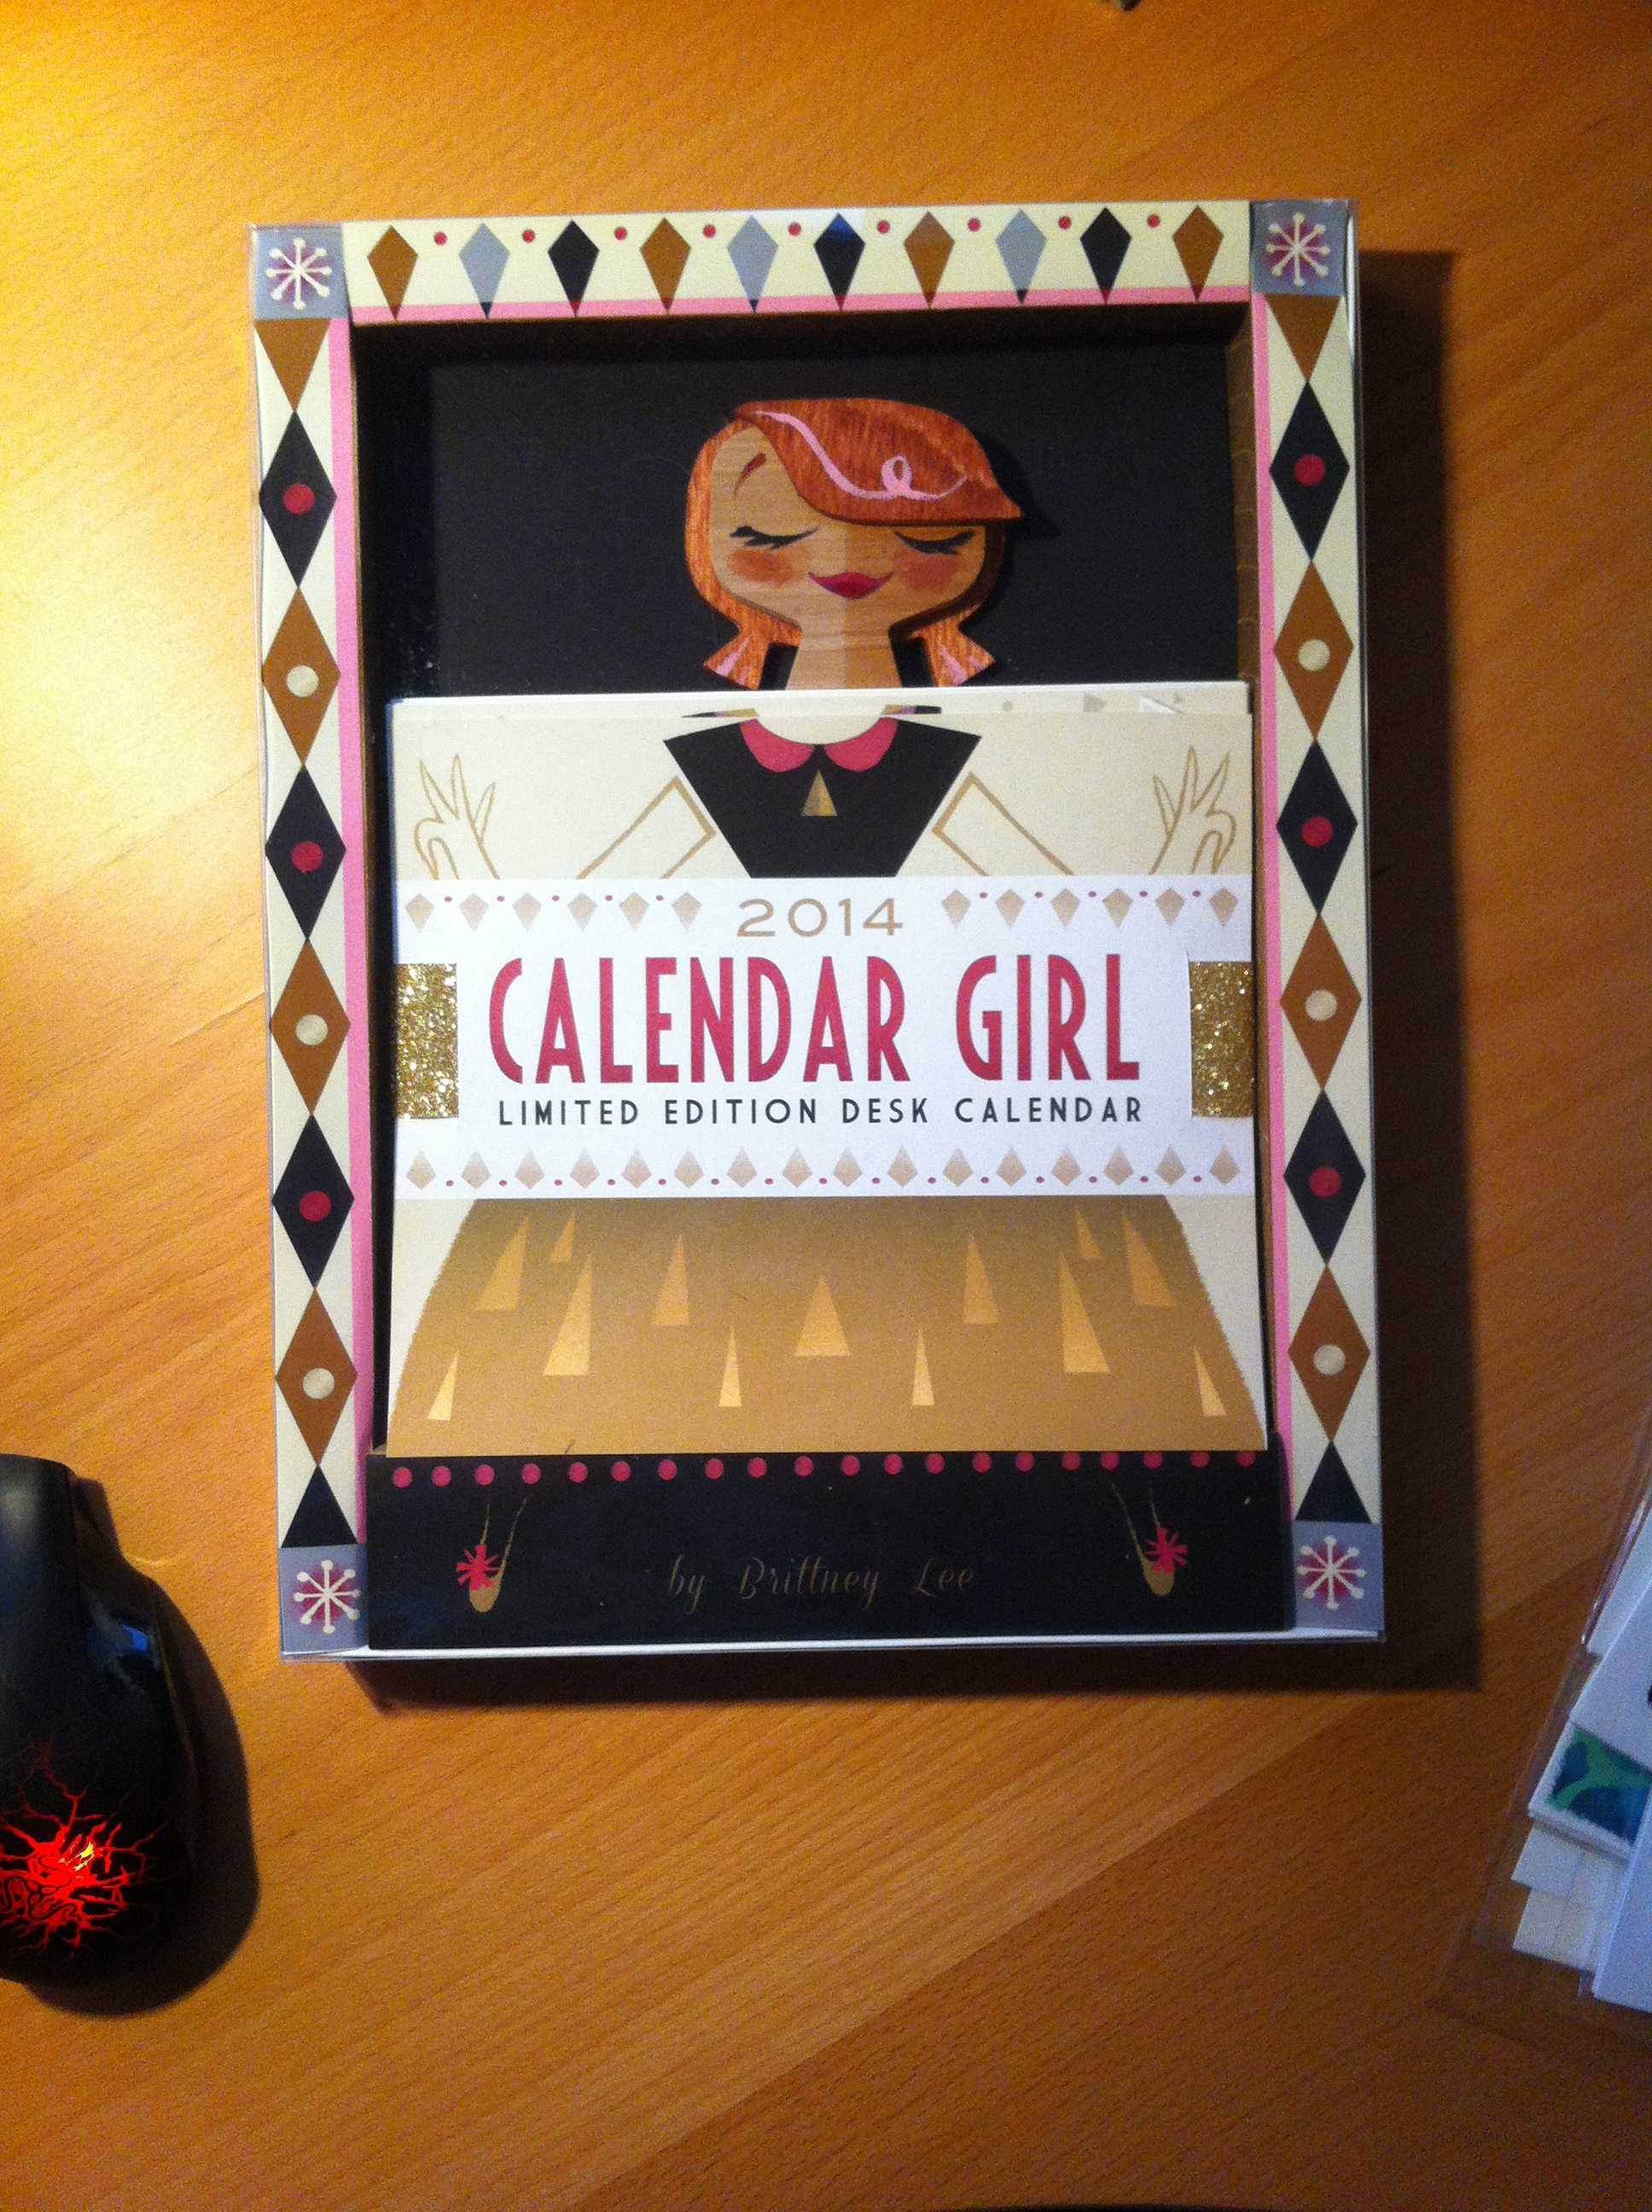  This was only one of three limited edition calendars&nbsp;made by Brittney Lee for CTNx &nbsp;- each hand made, hand painted. She'll be selling a total of 100 on her site. My lucky Wife Renee was able to snag one. :) 